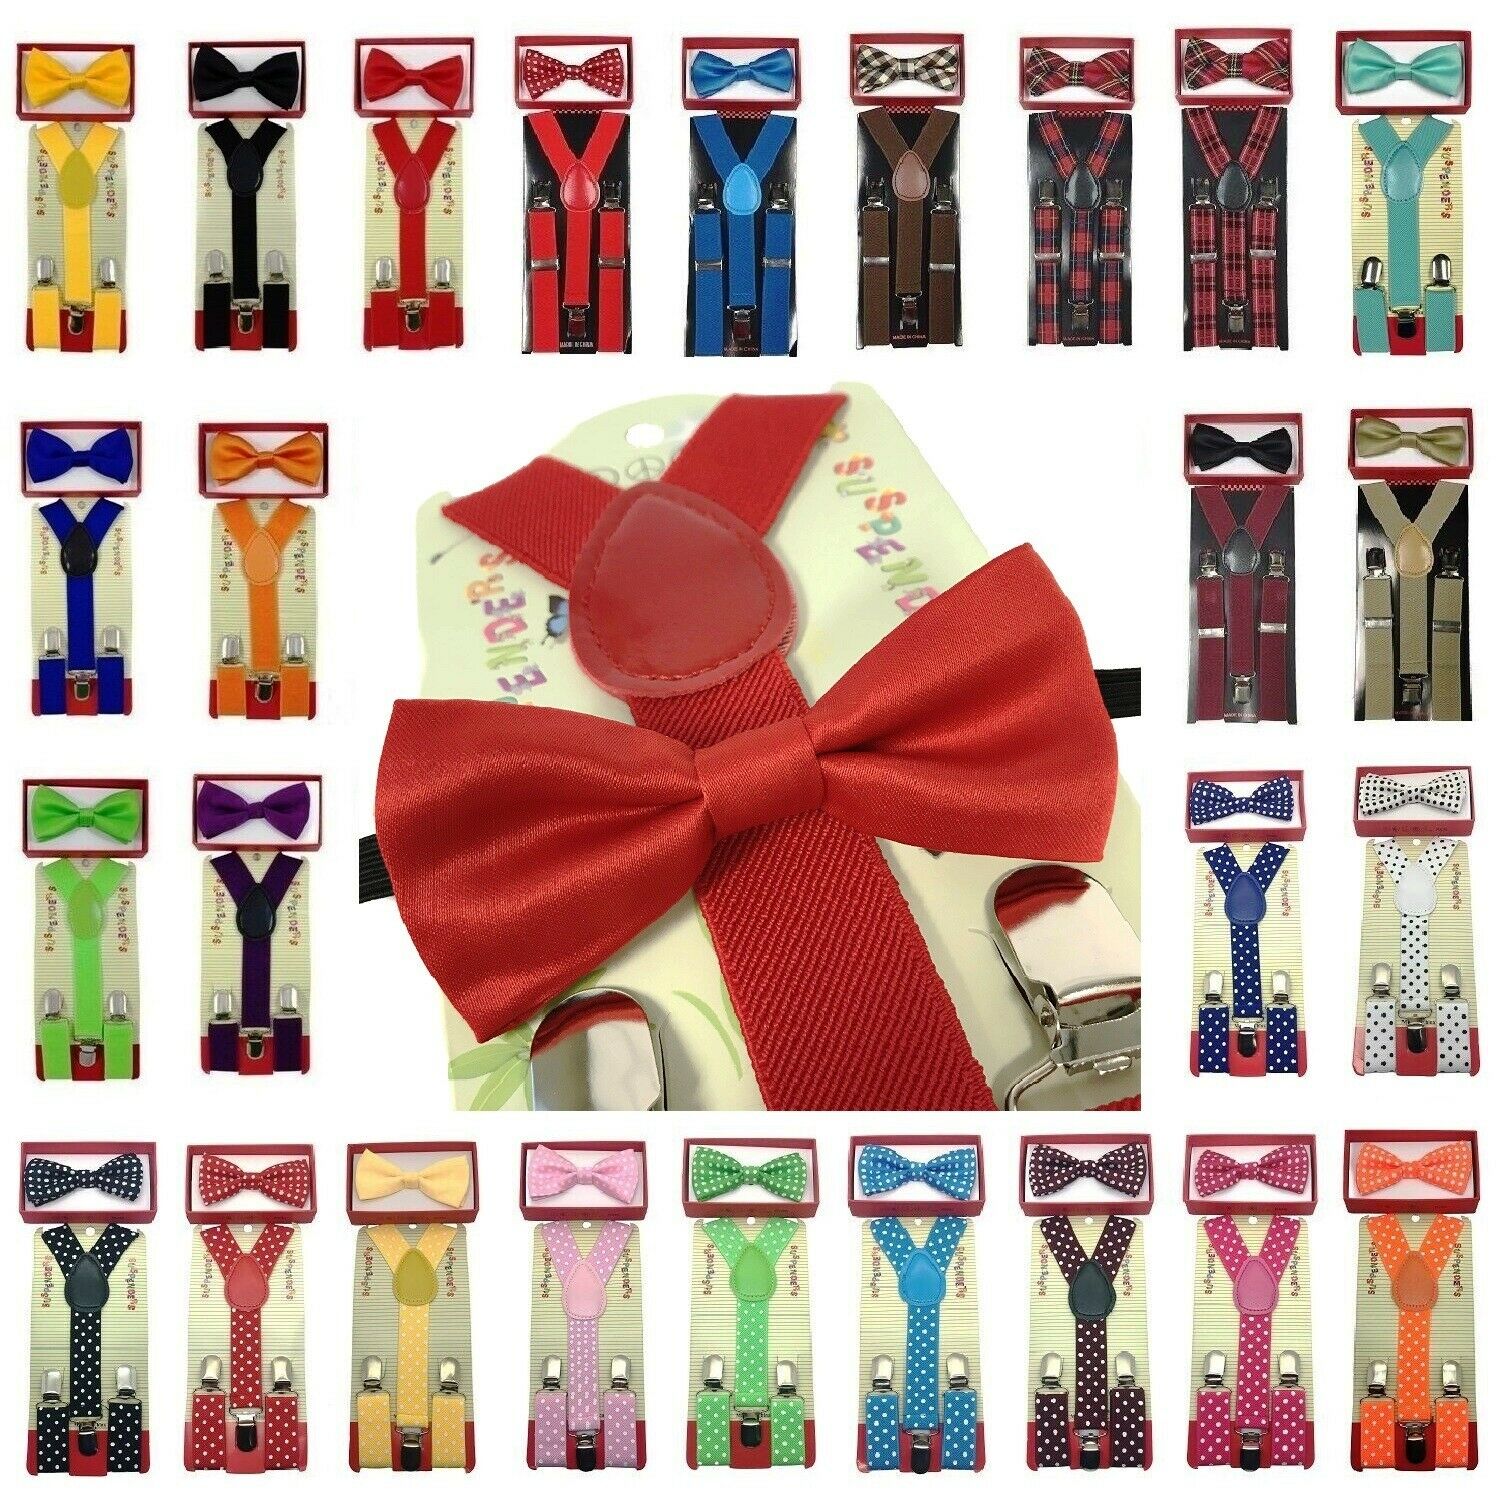 New Suspender + Bow Tie Matching Colors Sets For Boys Girls Kids Child Toddler